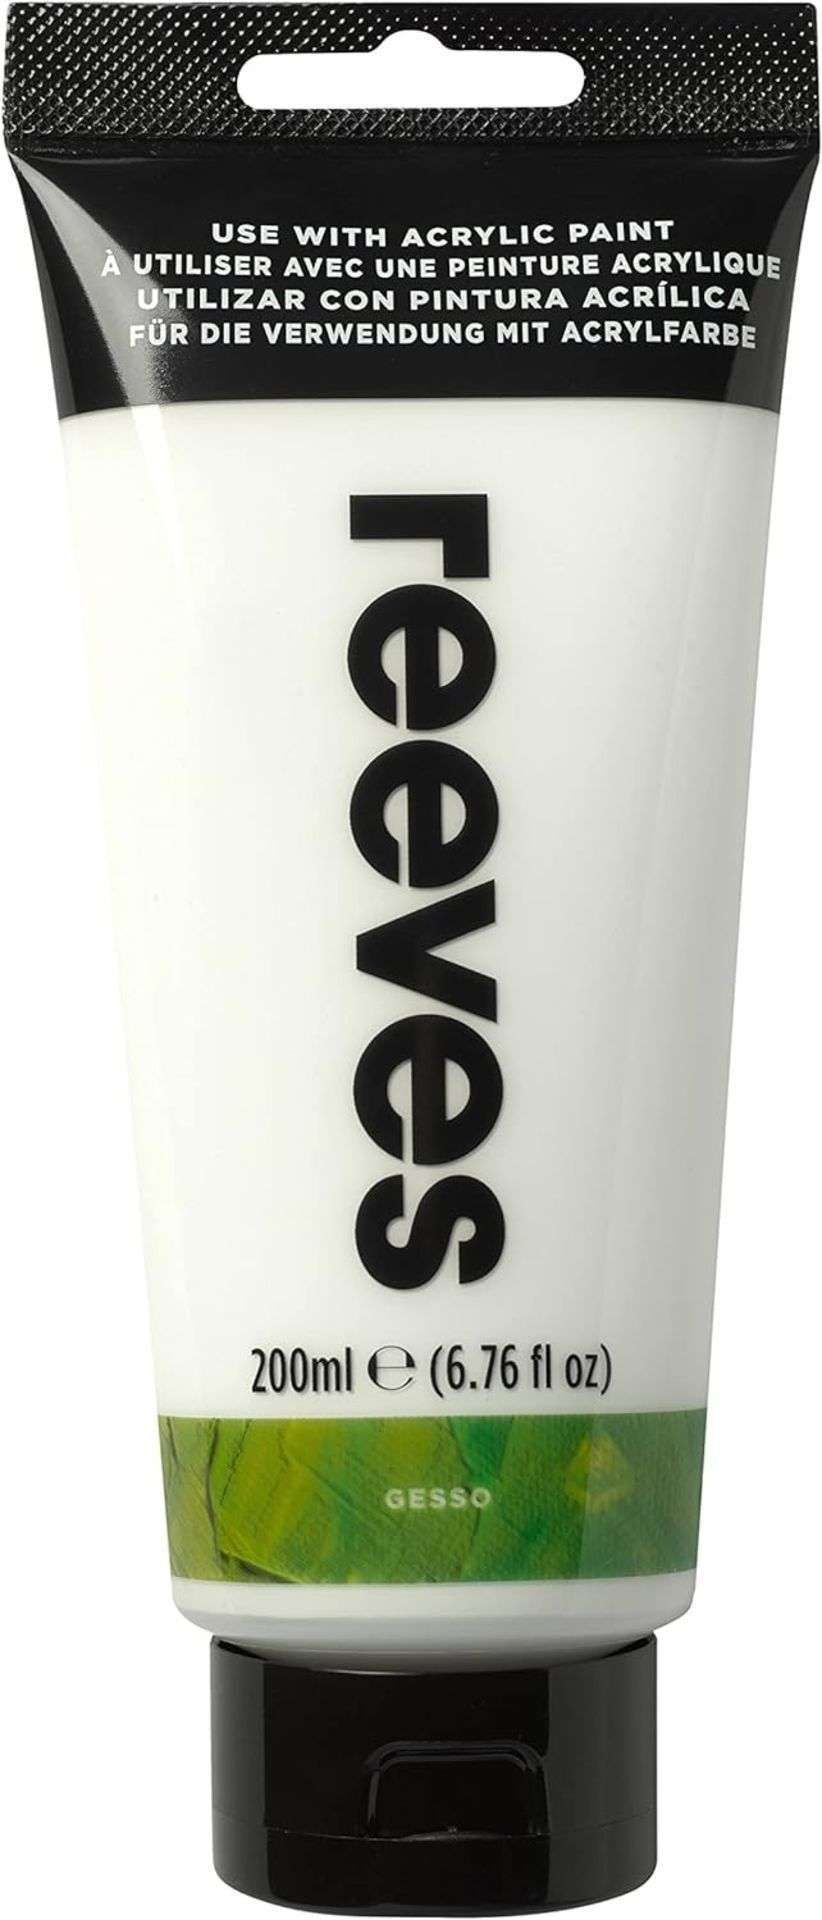 30x BRAND NEW REEVES Acrylic Additives Gesso Medium for Acrylic & Oil Paints 200ml. RRP £6.99